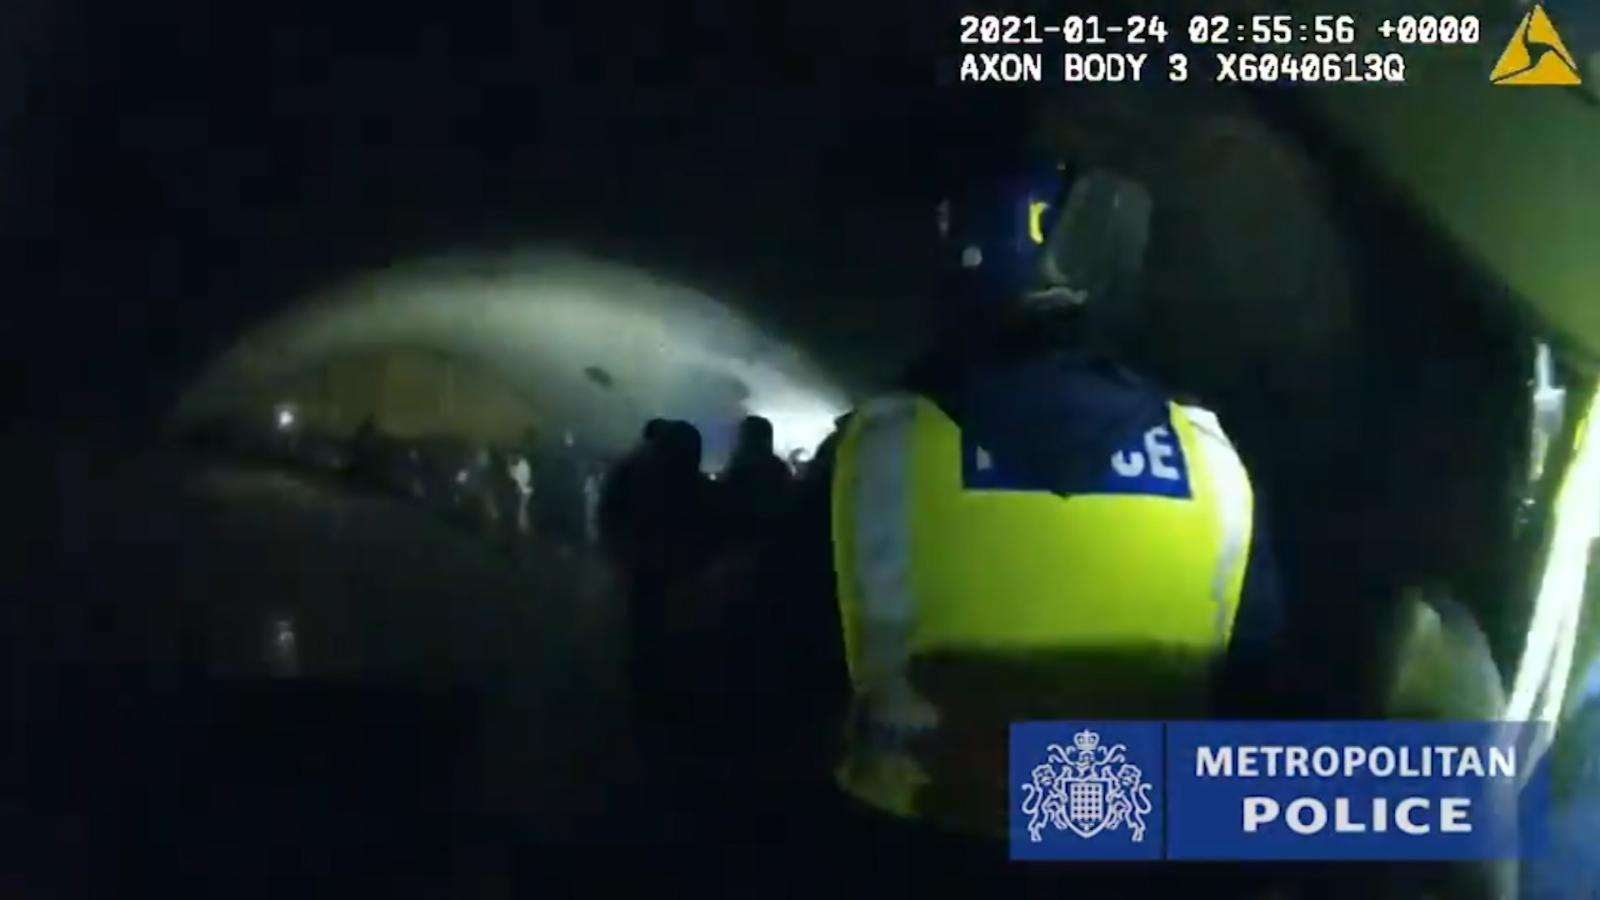 Police in London dissolve an electronic music festival of 300 people